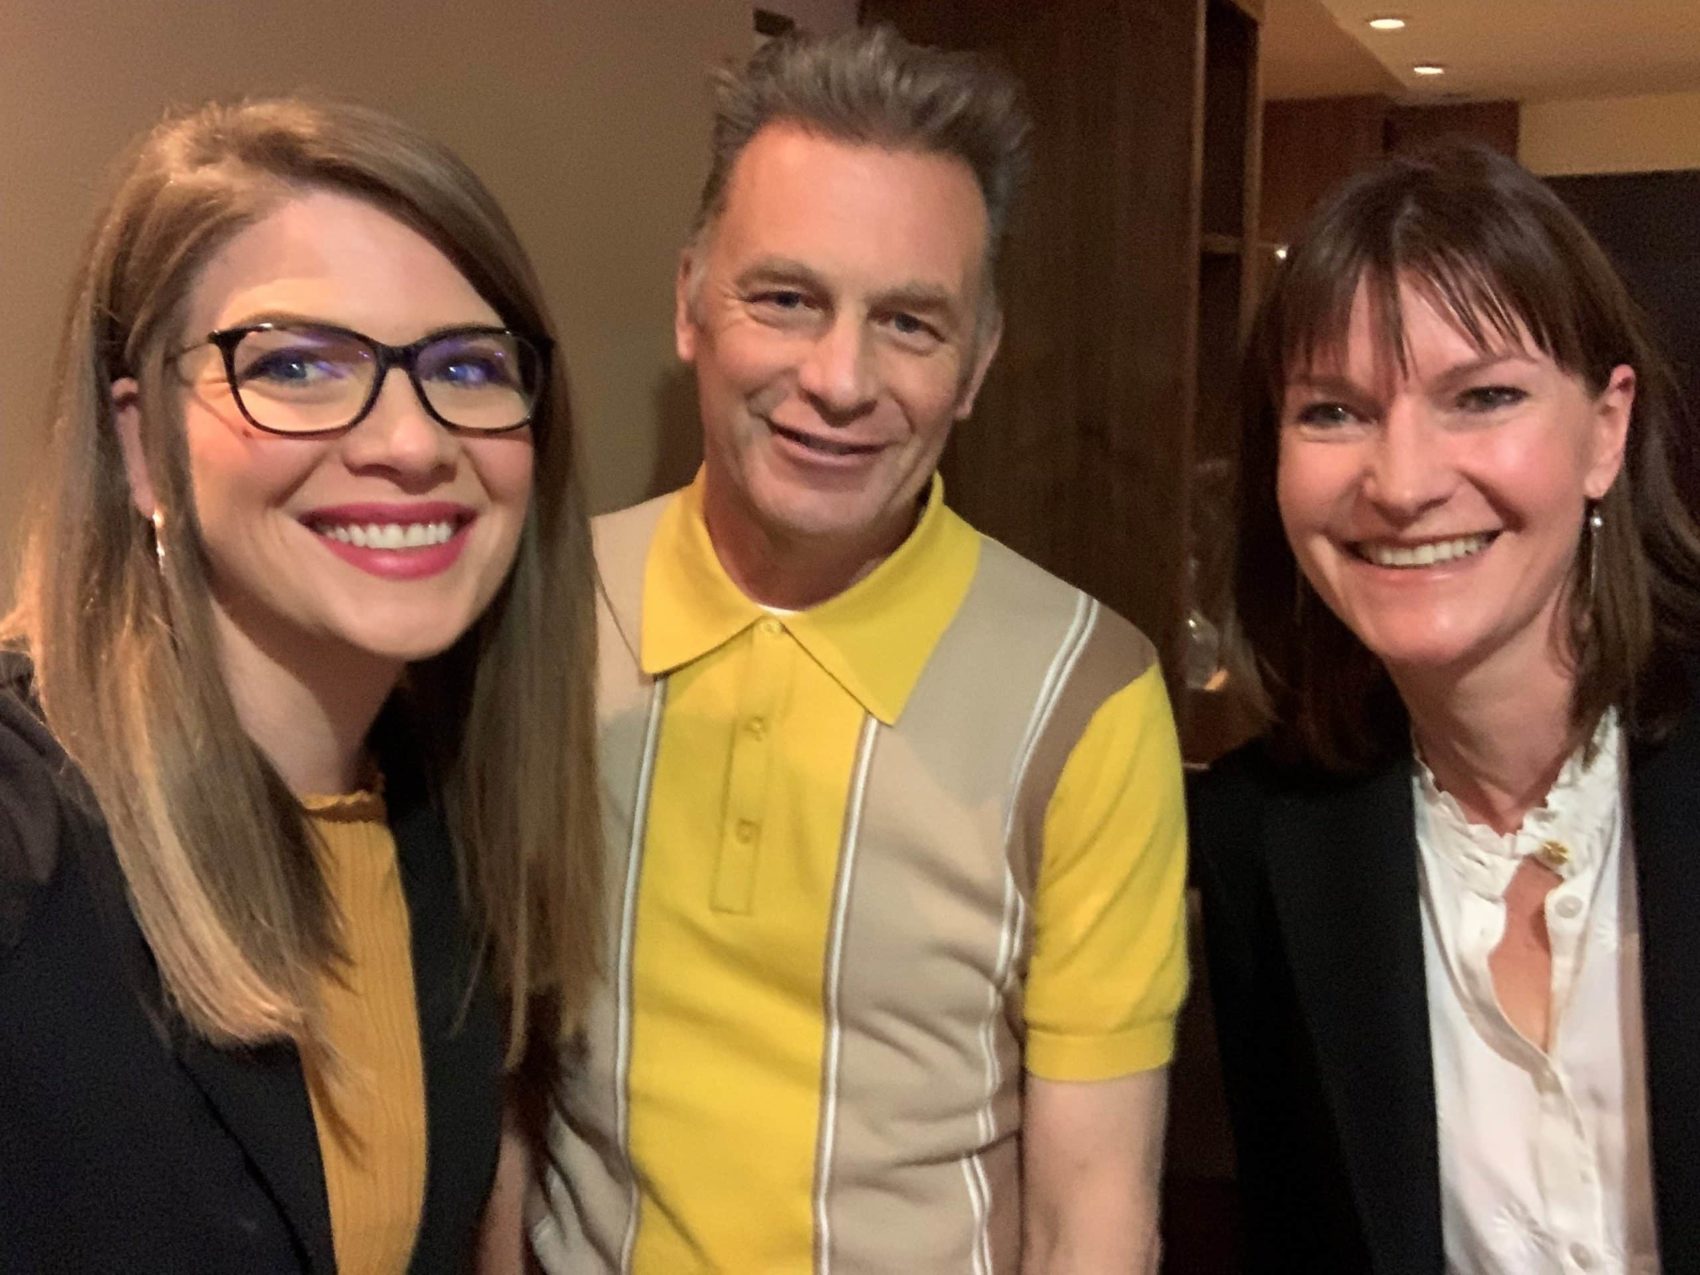 Erin is wearing a black blazer and yellow top, Chris is wearing a yellow and grey polo shirt and Sian a black blazer and white shirt. The image is taken as a selfie.